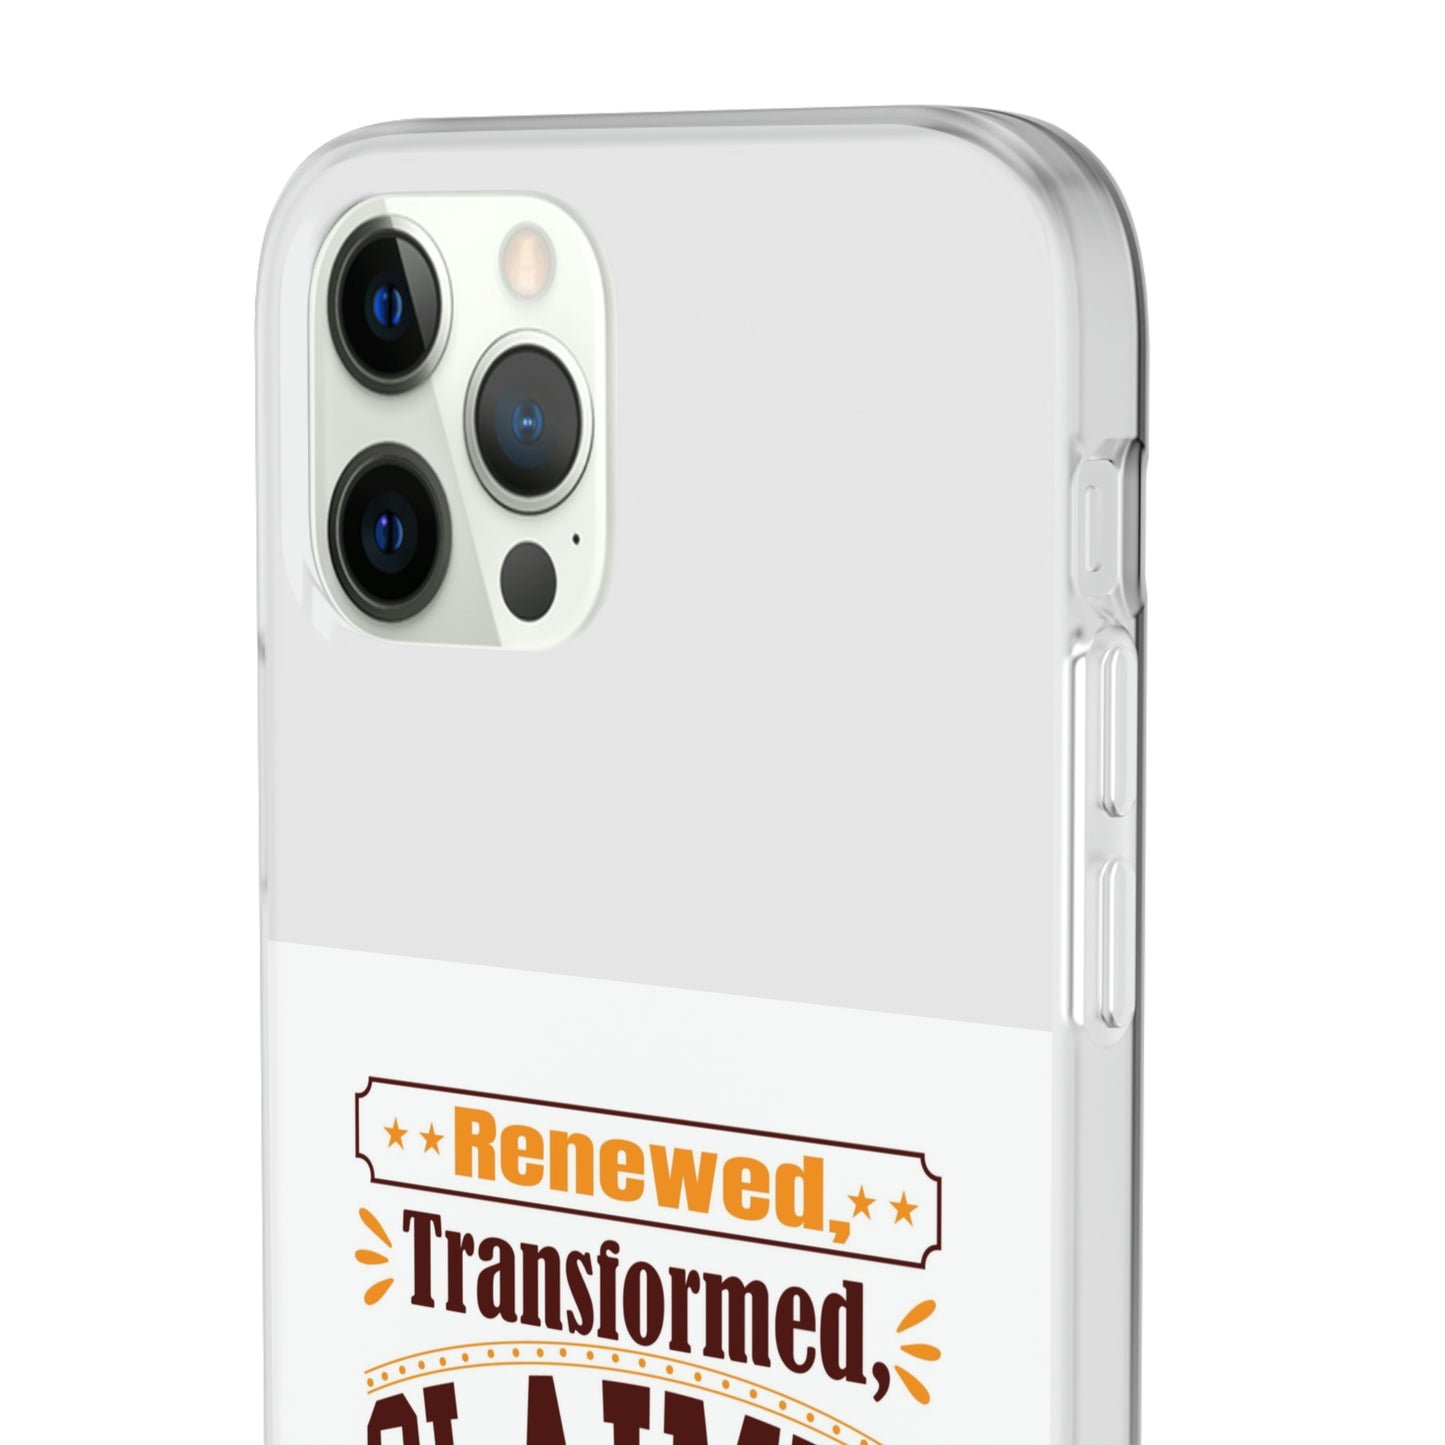 Renewed, Transformed, Claimed By God Flexi Phone Case